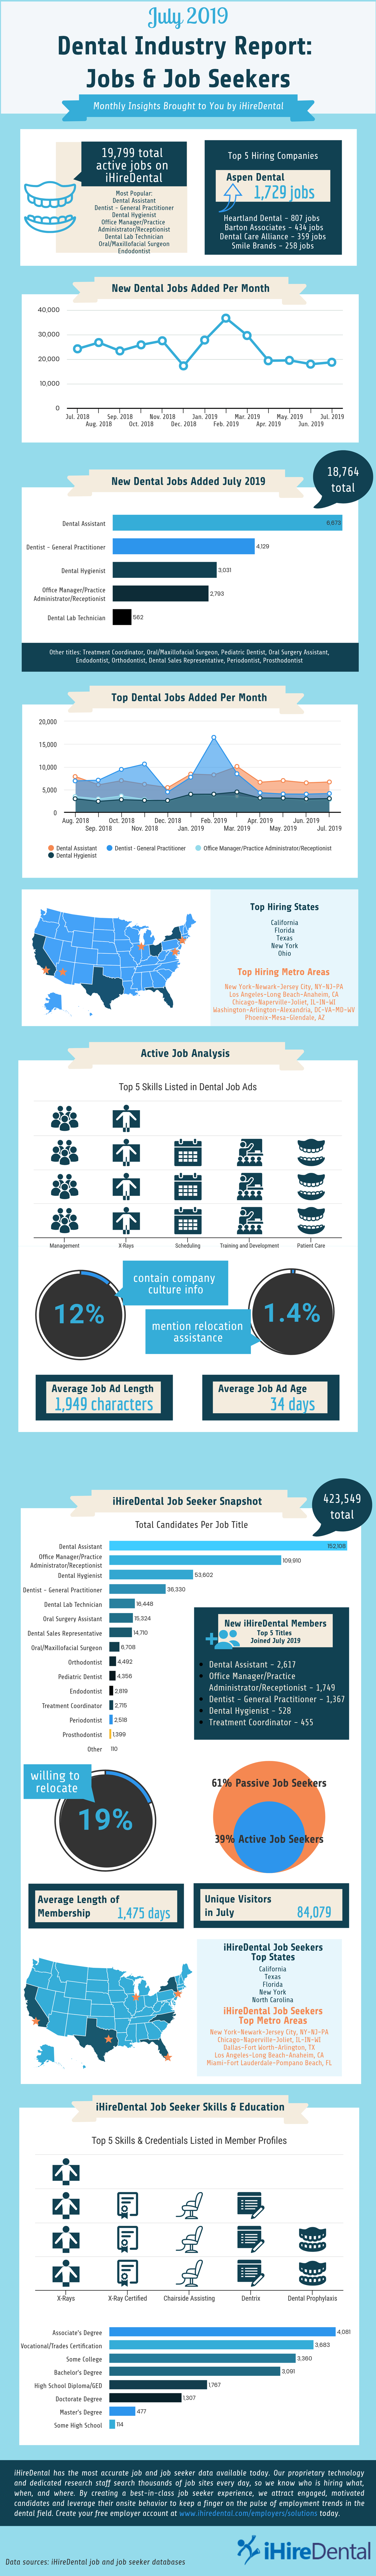 ihiredental july 2019 dental industry report infographic